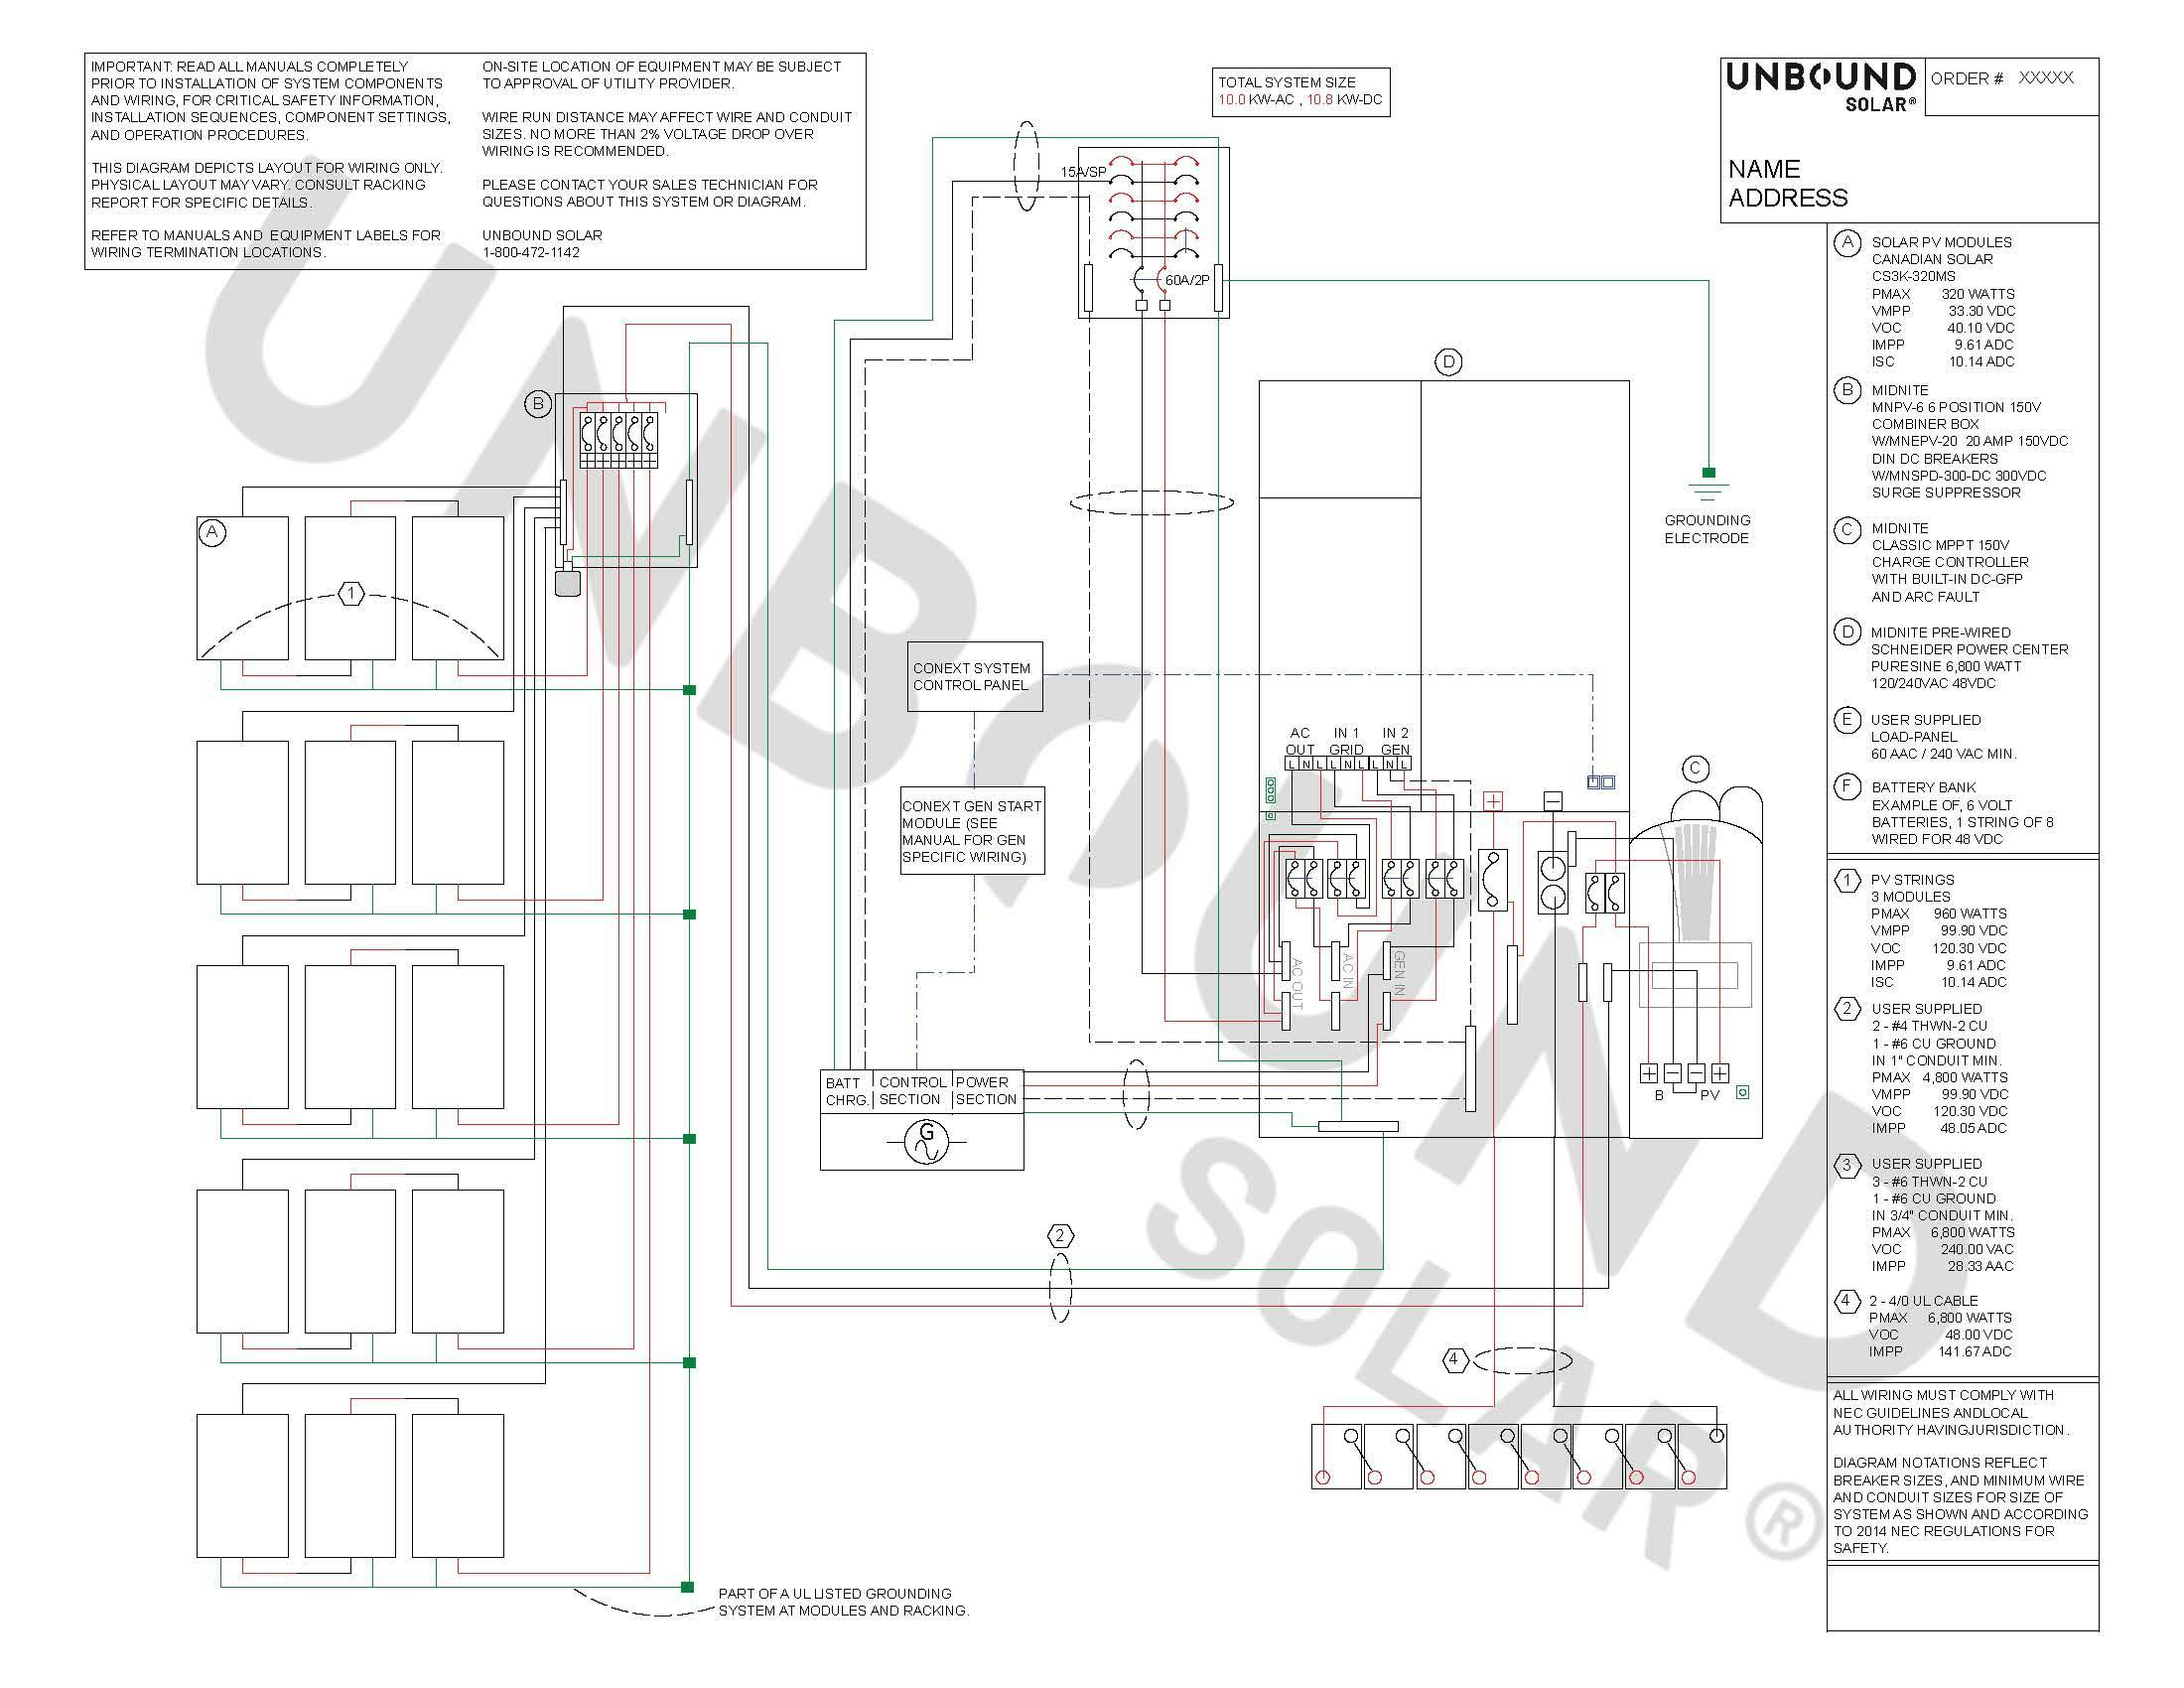 Electrical Wiring Diagrams From Unbound, Solar Energy Systems Wiring Diagram Examples